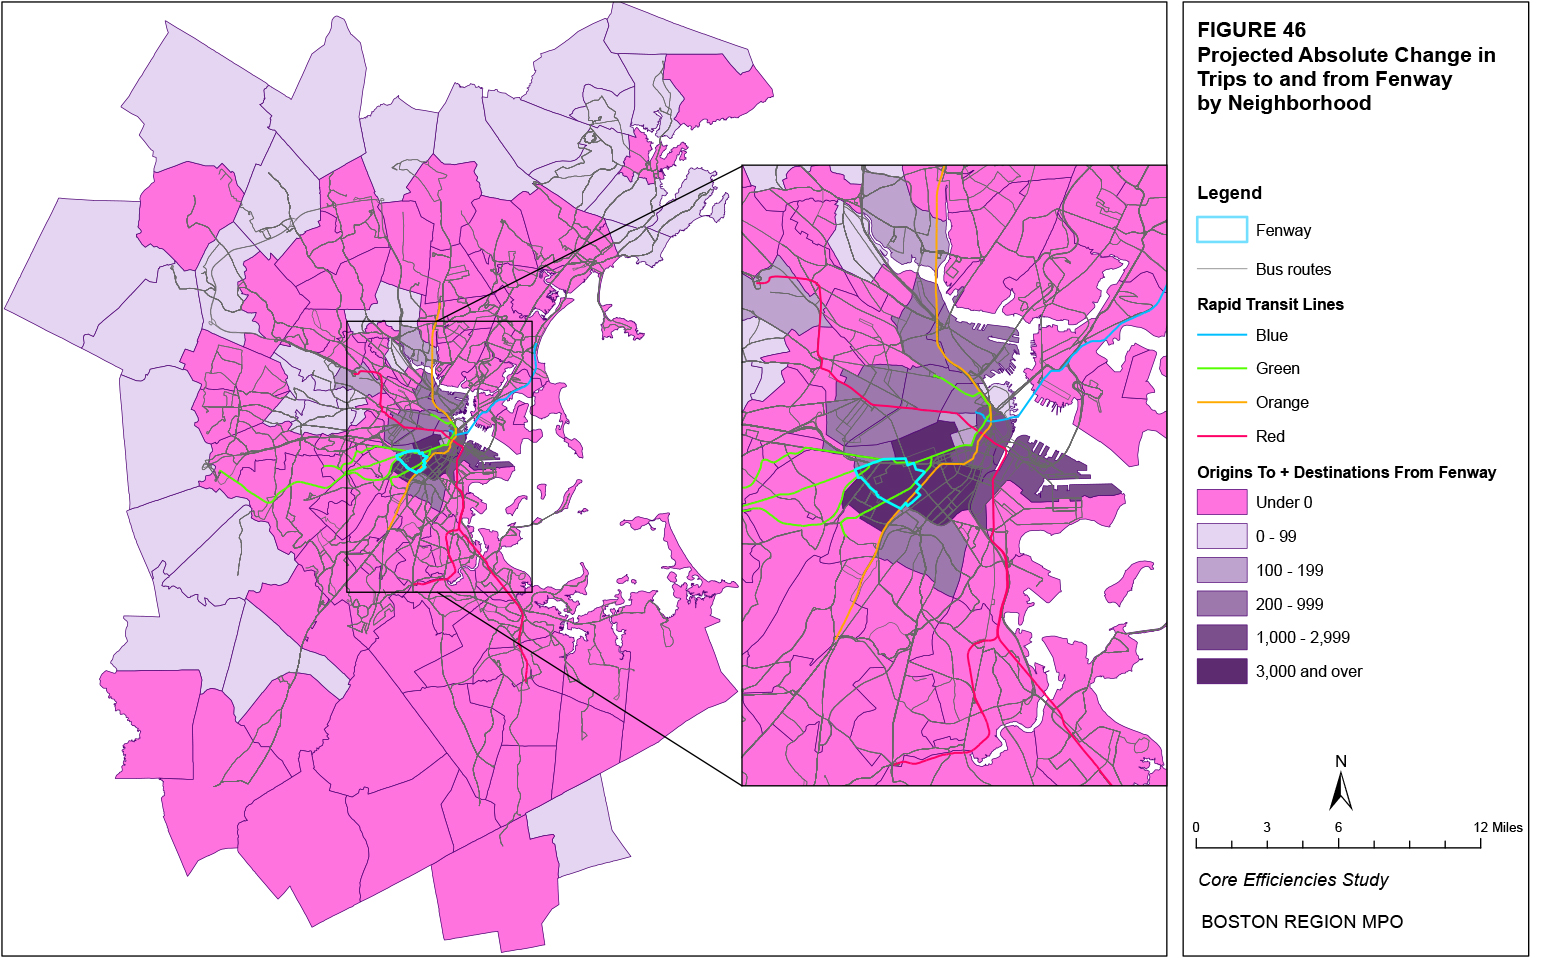 This map shows the projected absolute change in trips to and from the Fenway neighborhood by neighborhood.